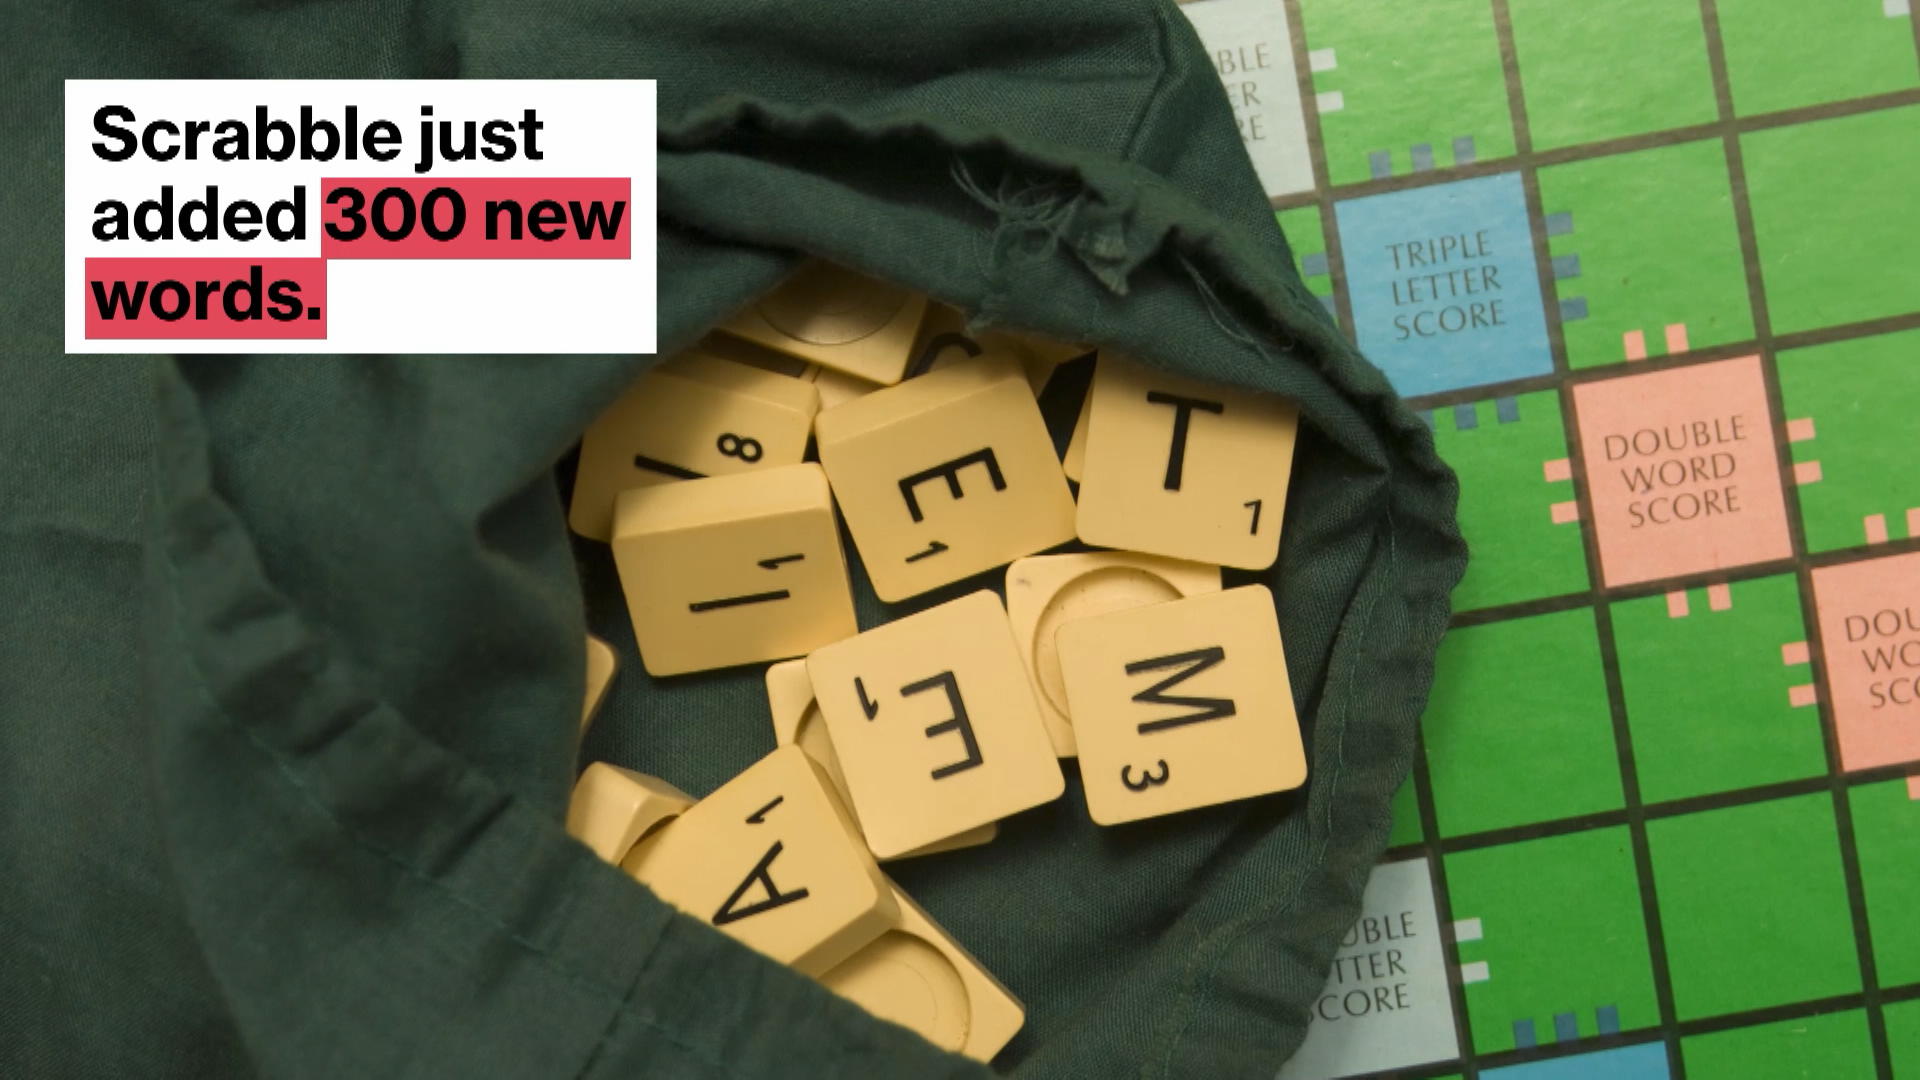 Scrabble Releases New Dictionary with 300 New Words Bloomberg